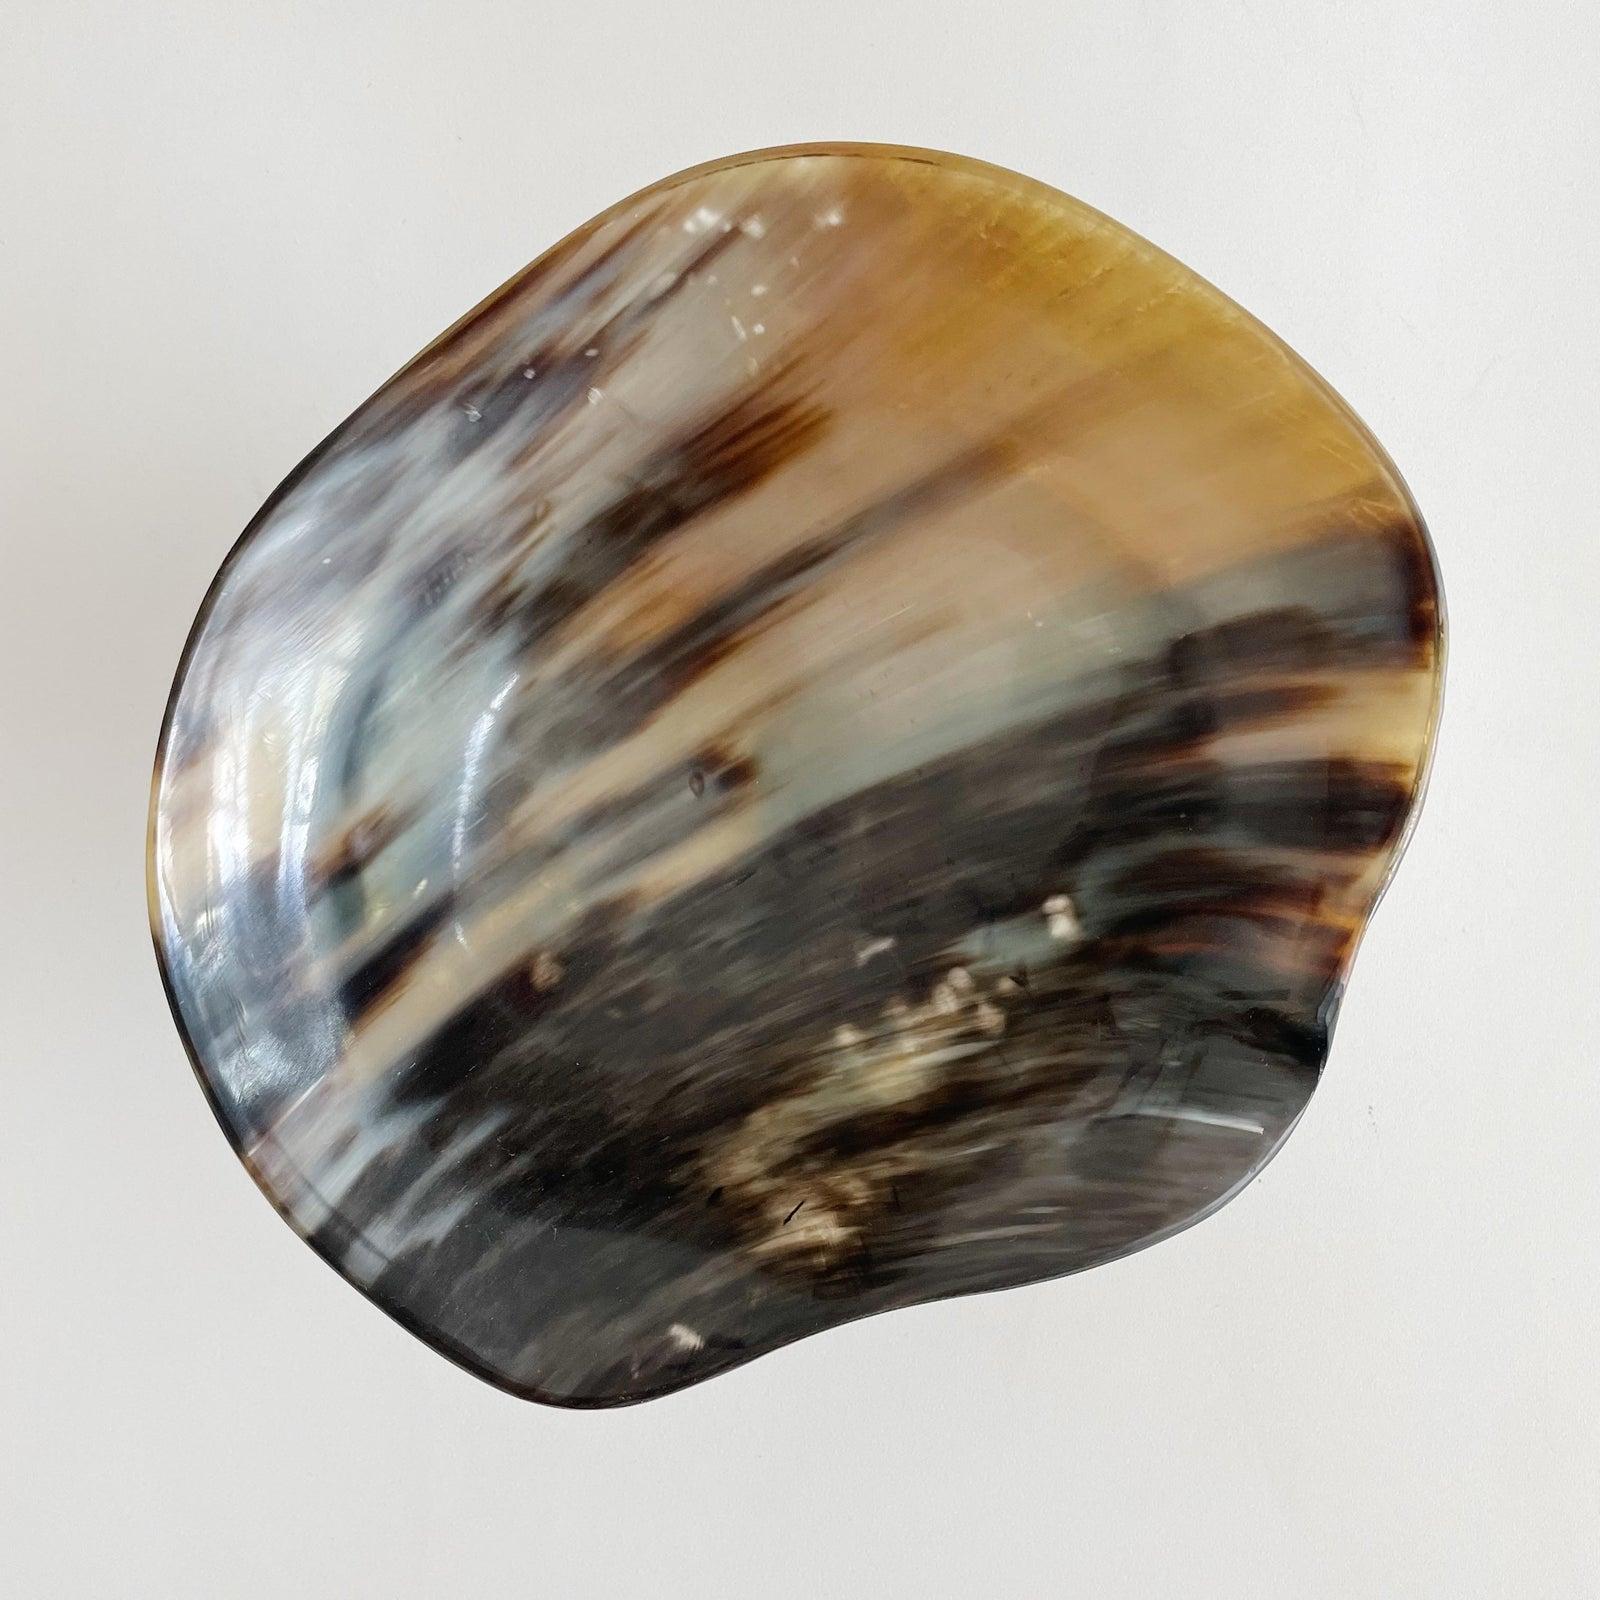 Footed bowl, vide Poche, catchall made from water buffalo Horn, with a polished interior, and the exterior left in its natural state. Unsigned.